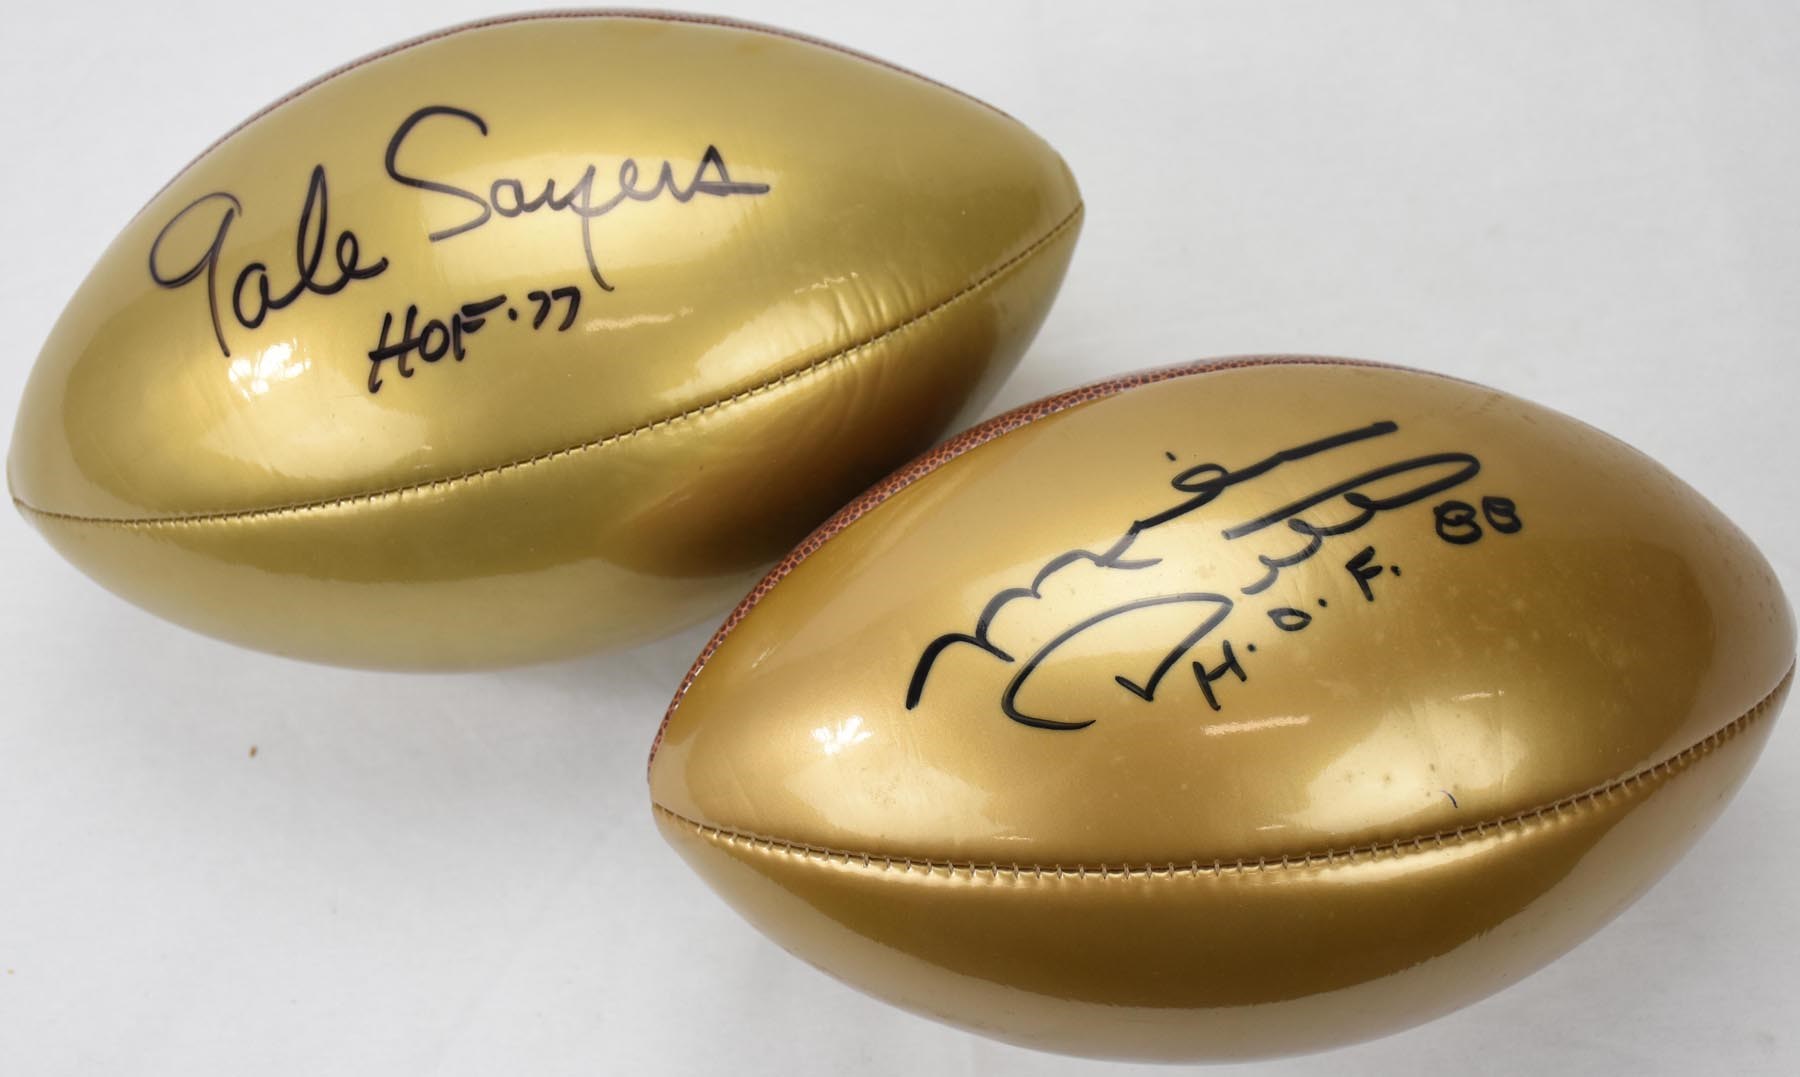 - Gale Sayers & Mike Ditka Signed Footballs